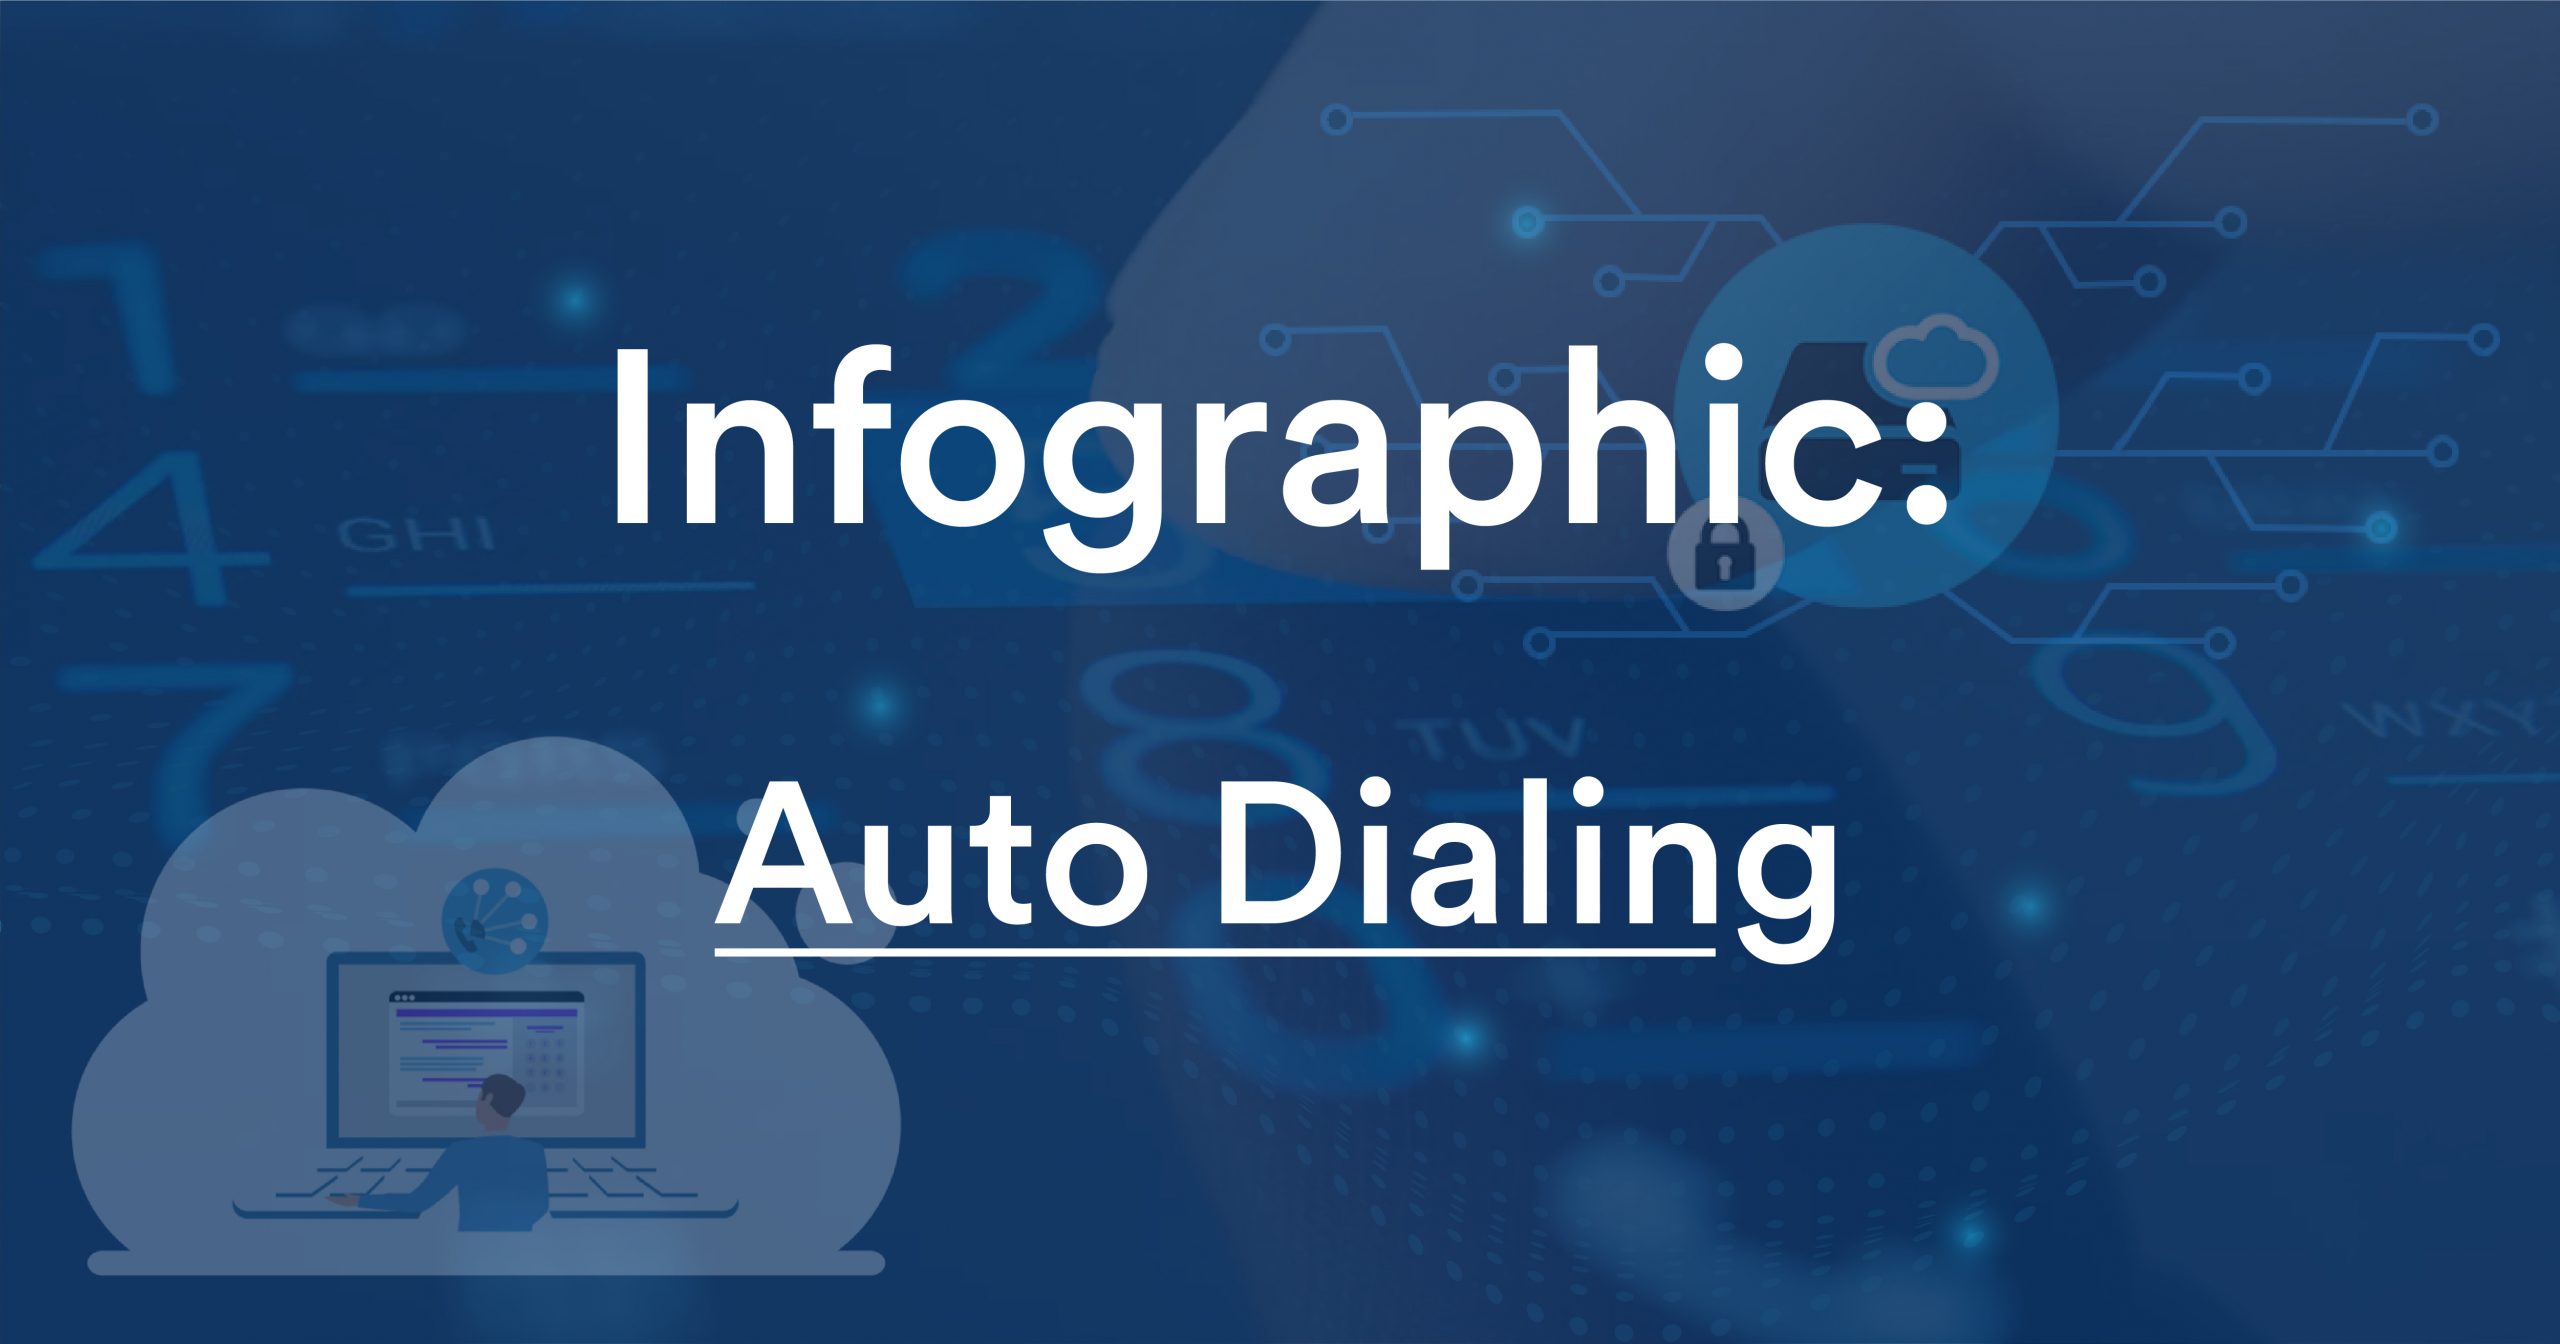 Infographic: Auto Dialing and Efficiency Metrics